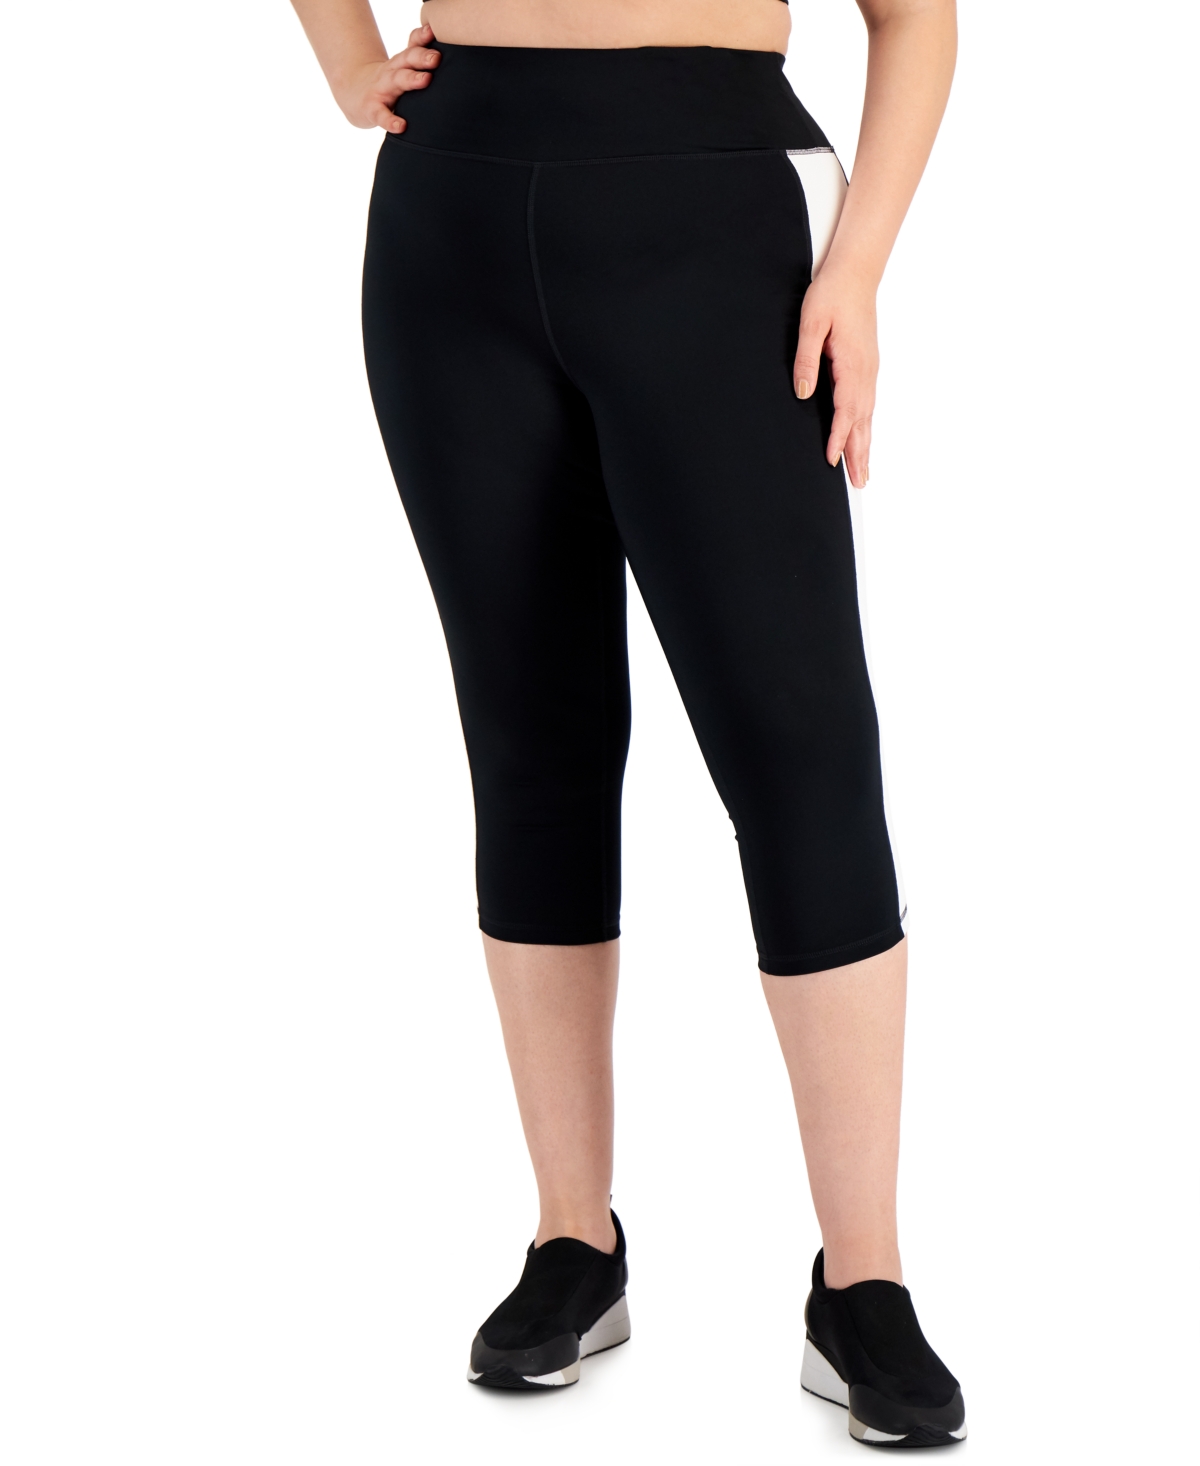 Id Ideology Plus Size Colorblocked Capri Leggings, Created for Macy's